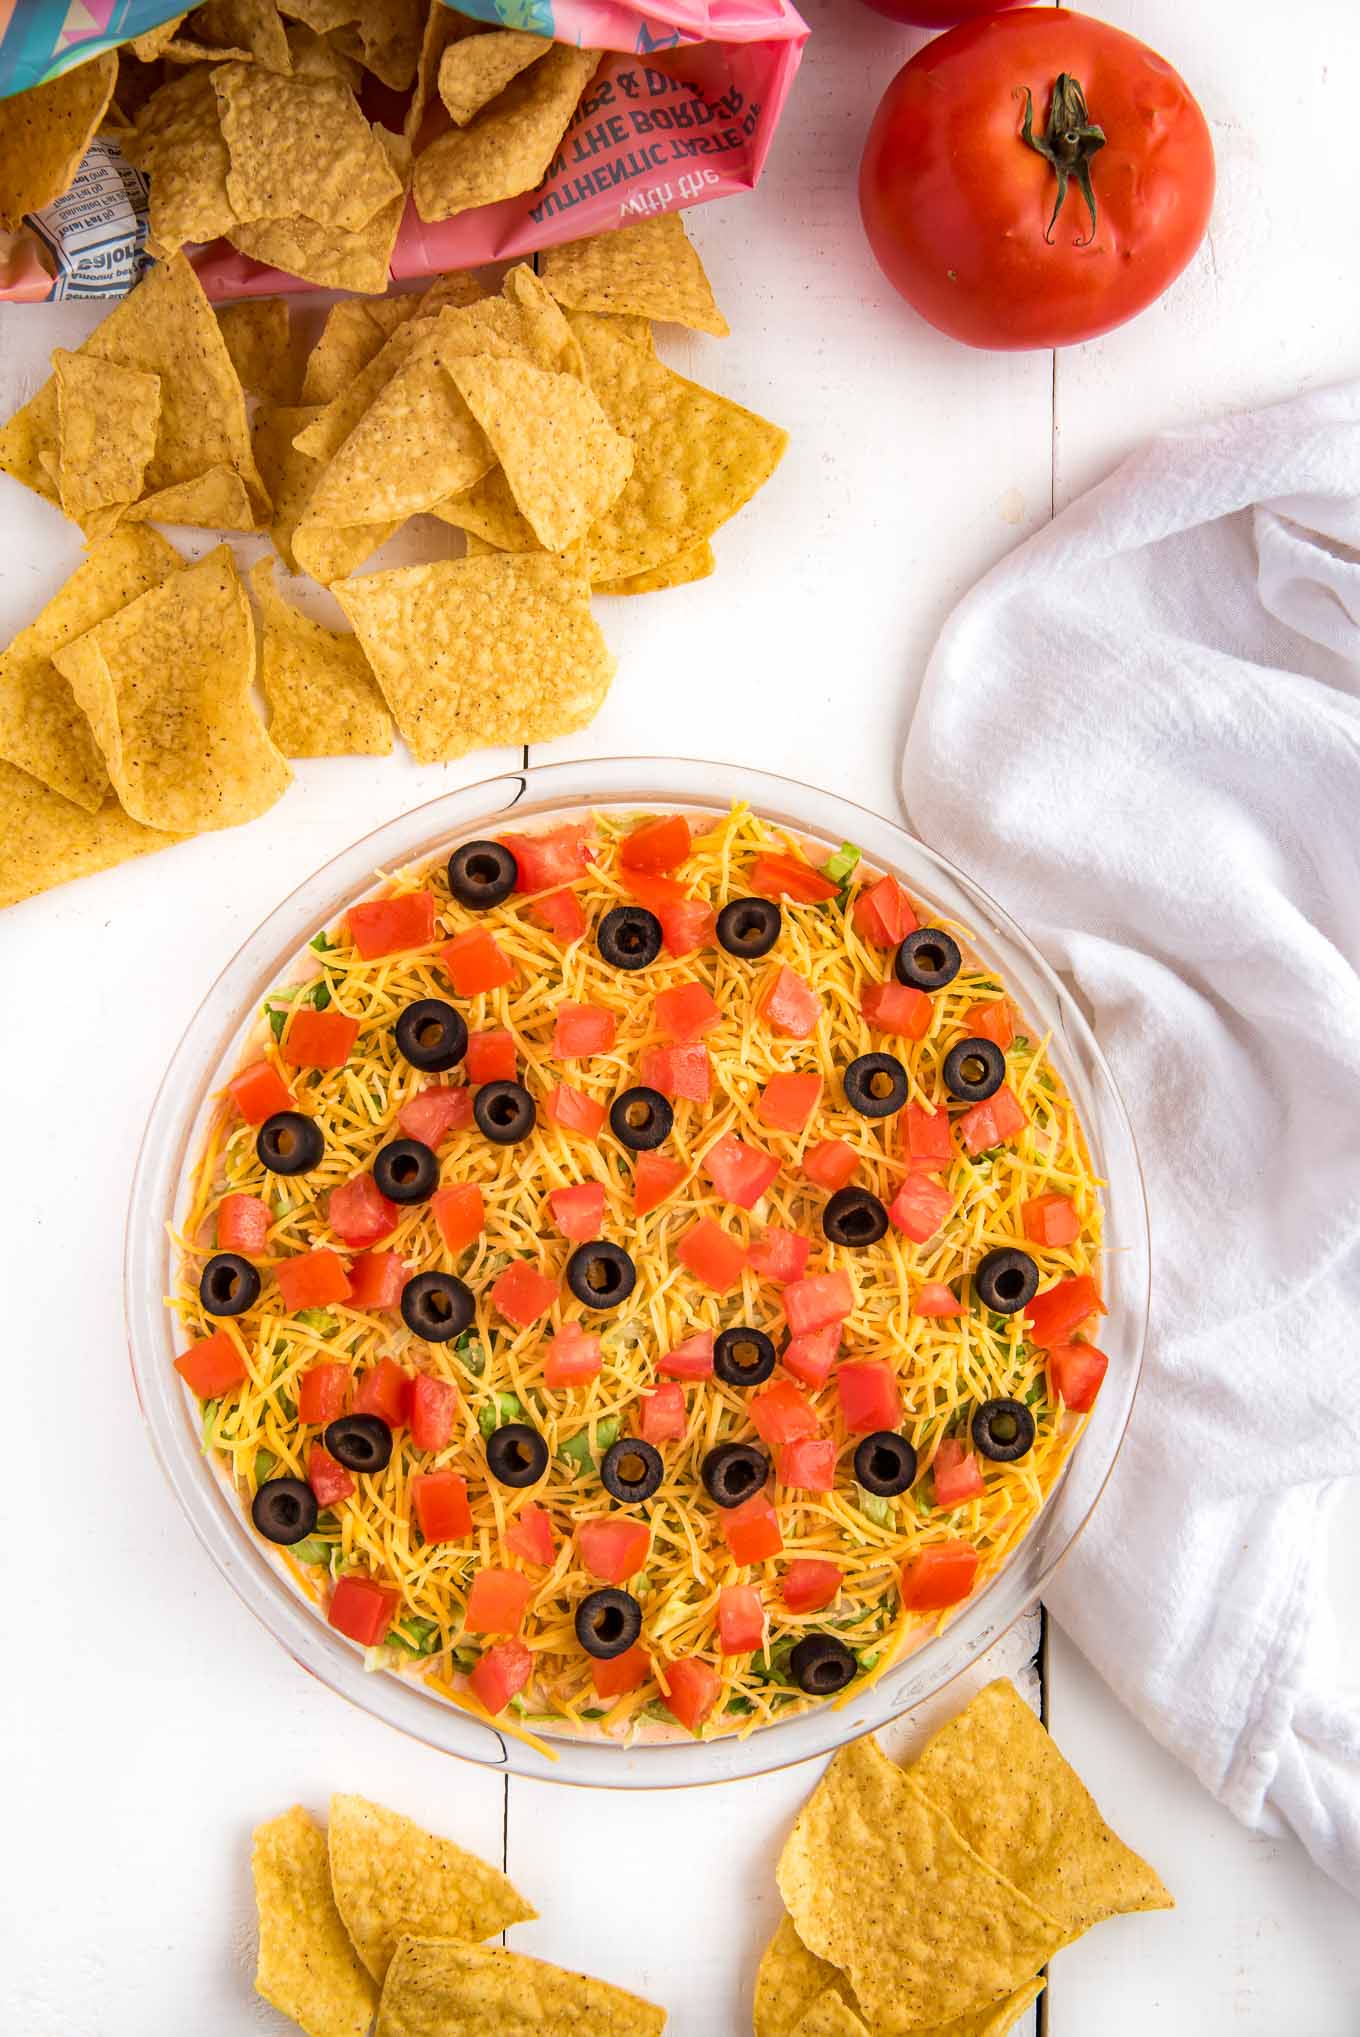 A serving bowl of taco dip on the table with a bag of chips spilling out next to it and a tomato.